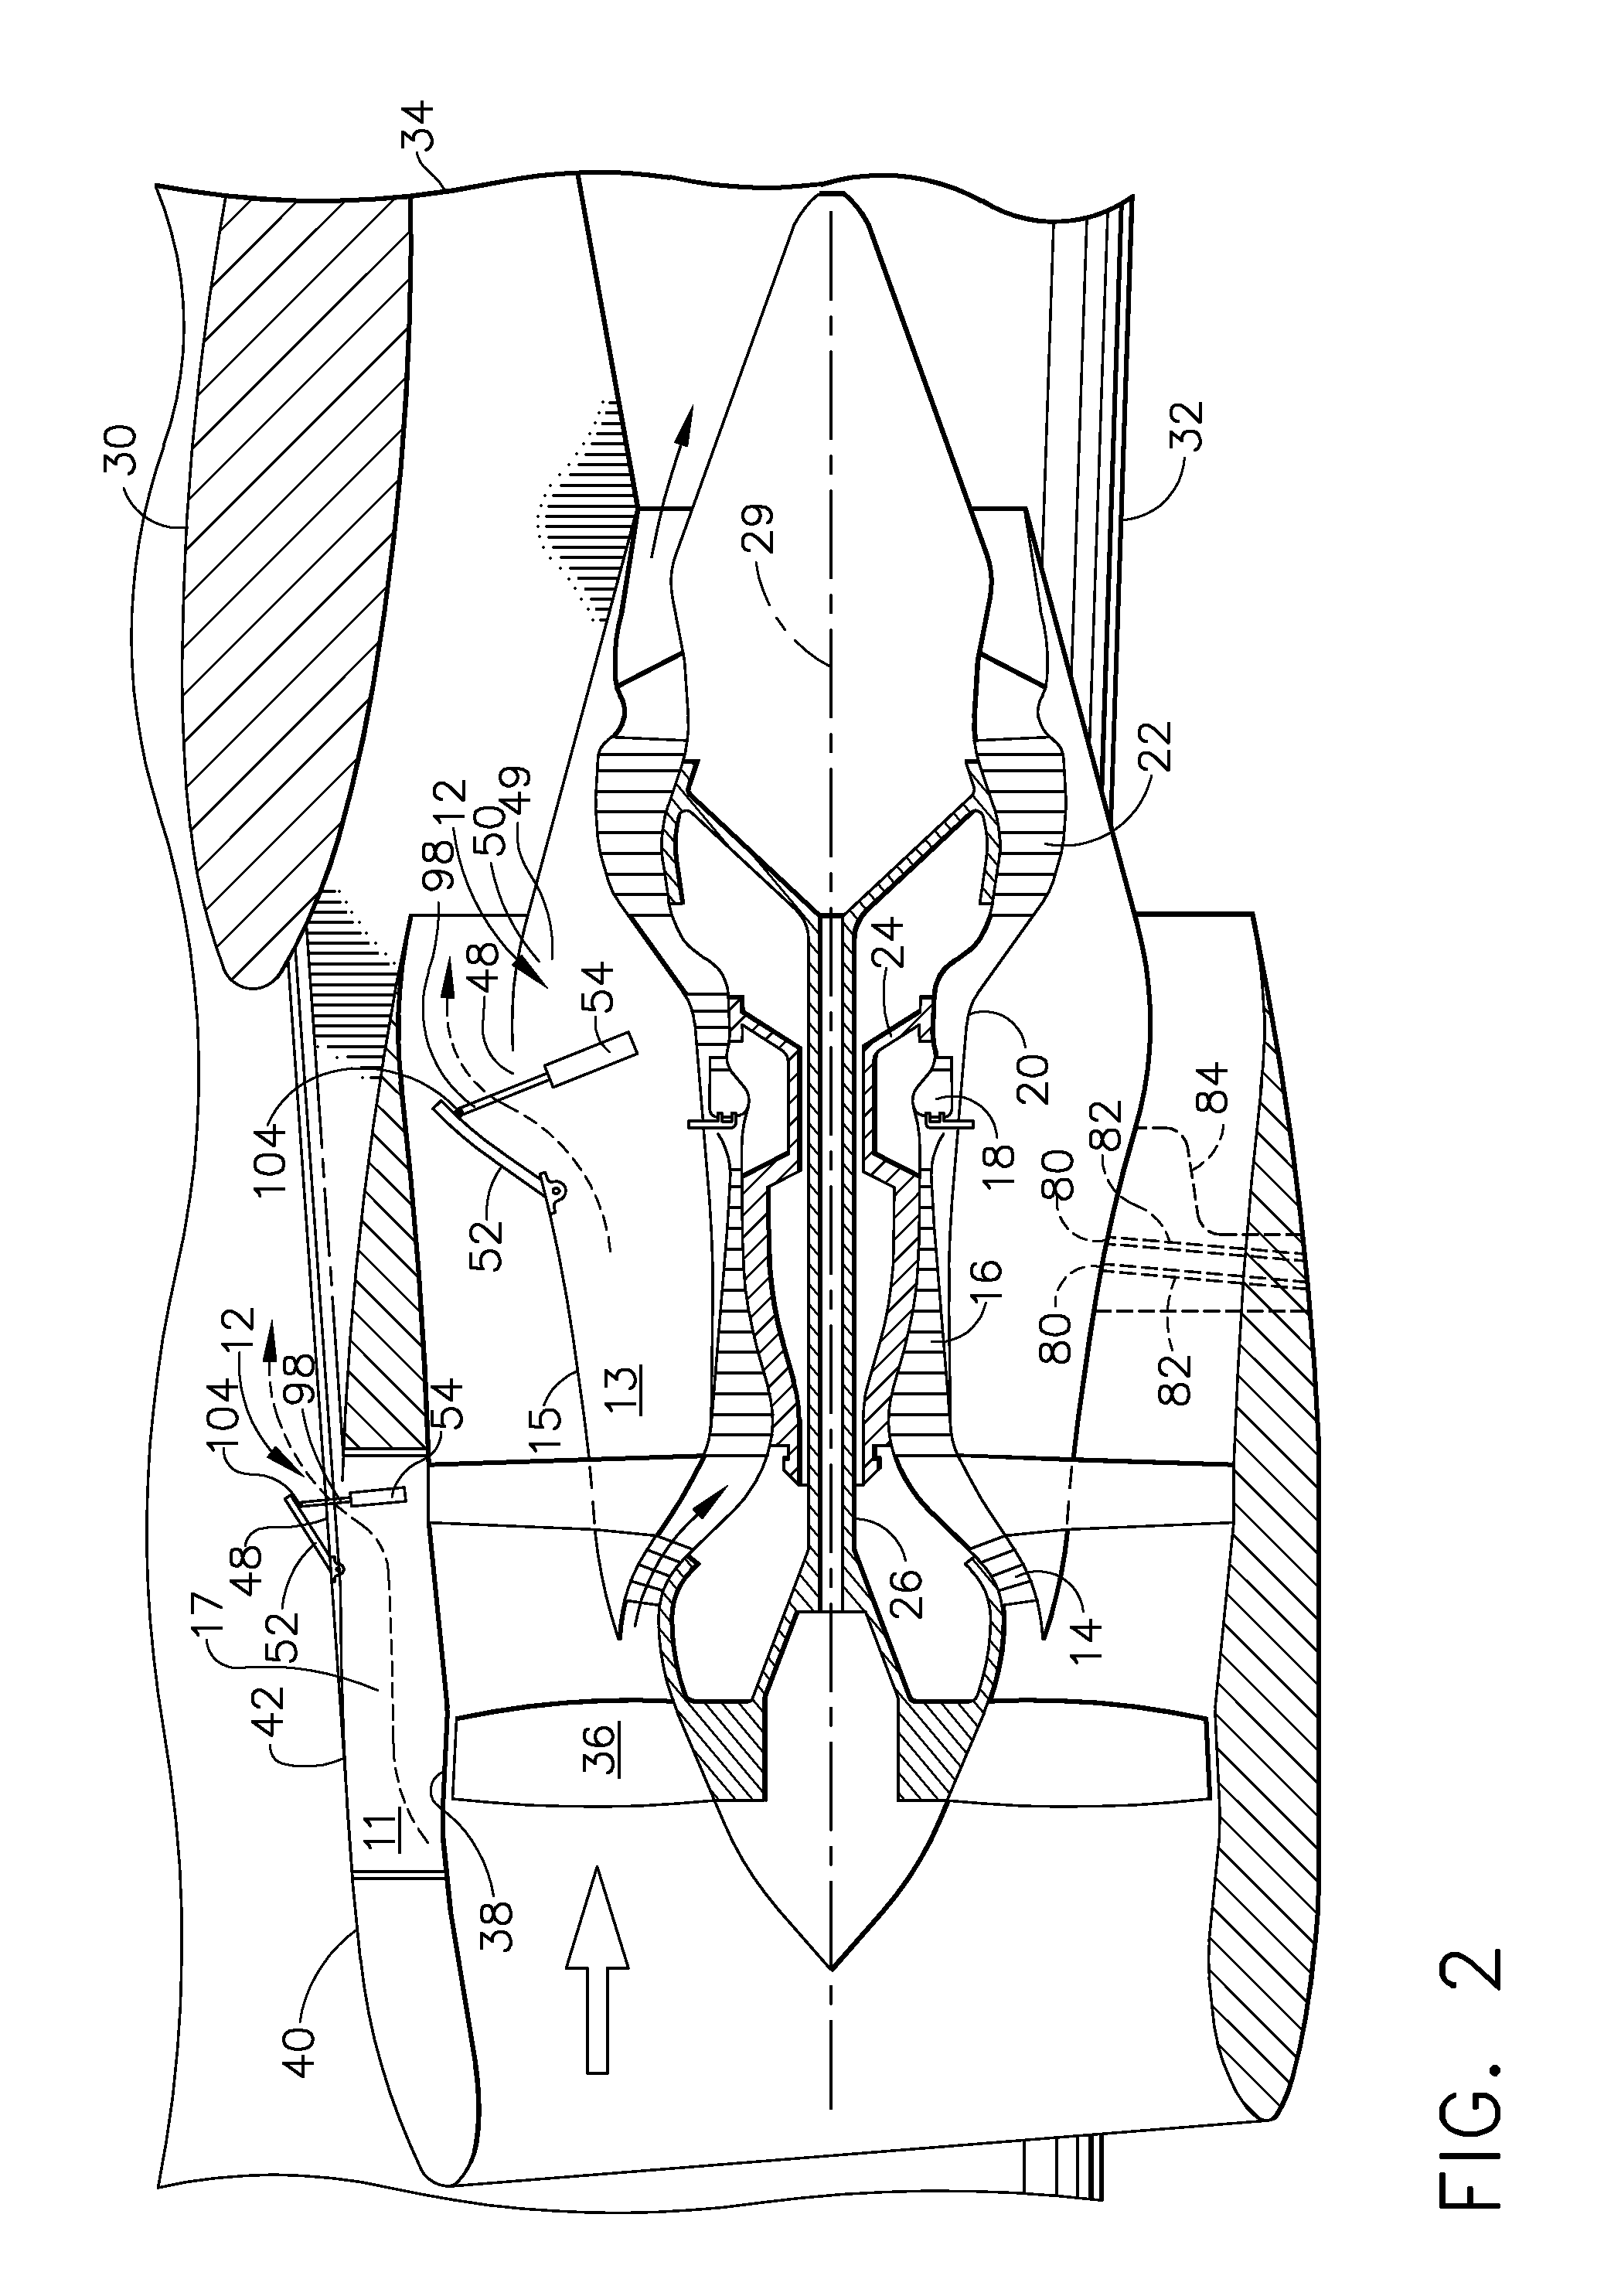 Thermally actuated passive gas turbine engine compartment venting